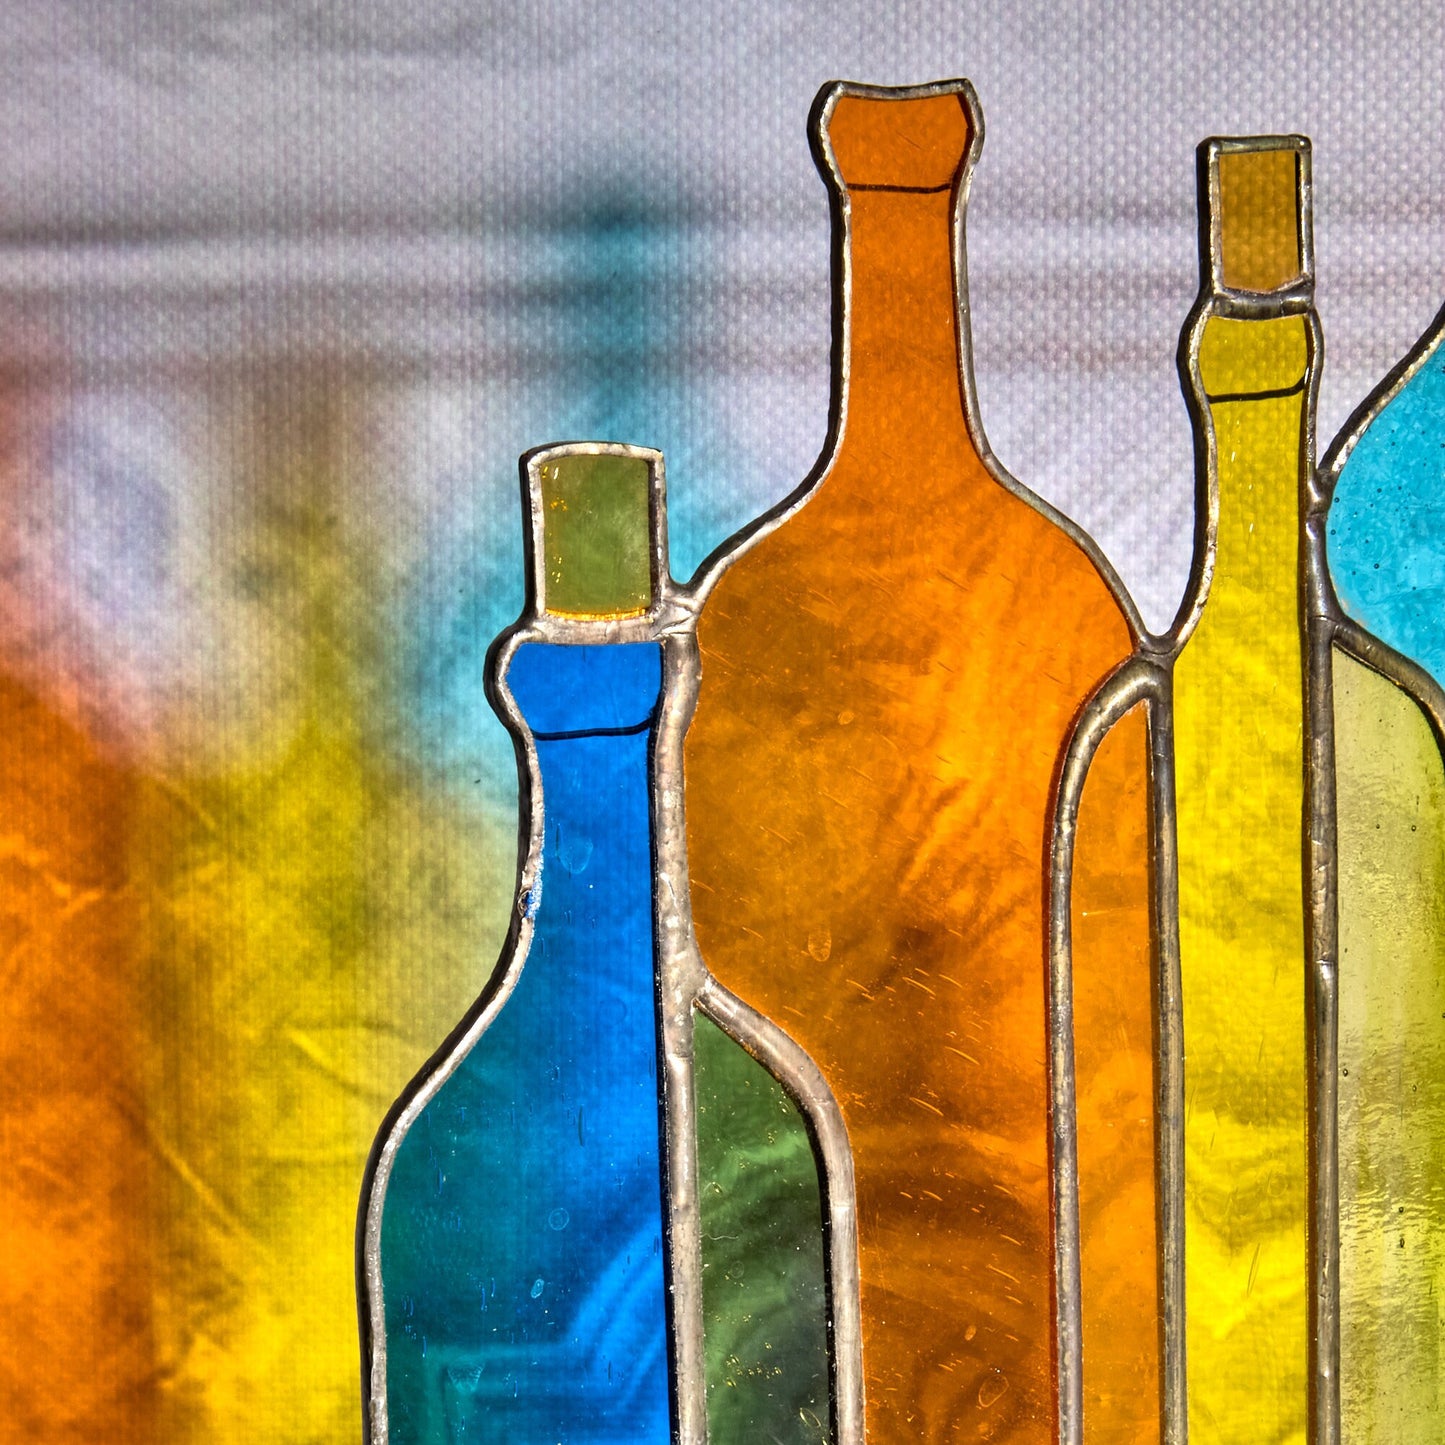 Colorful bottles Stained glass table stand decor